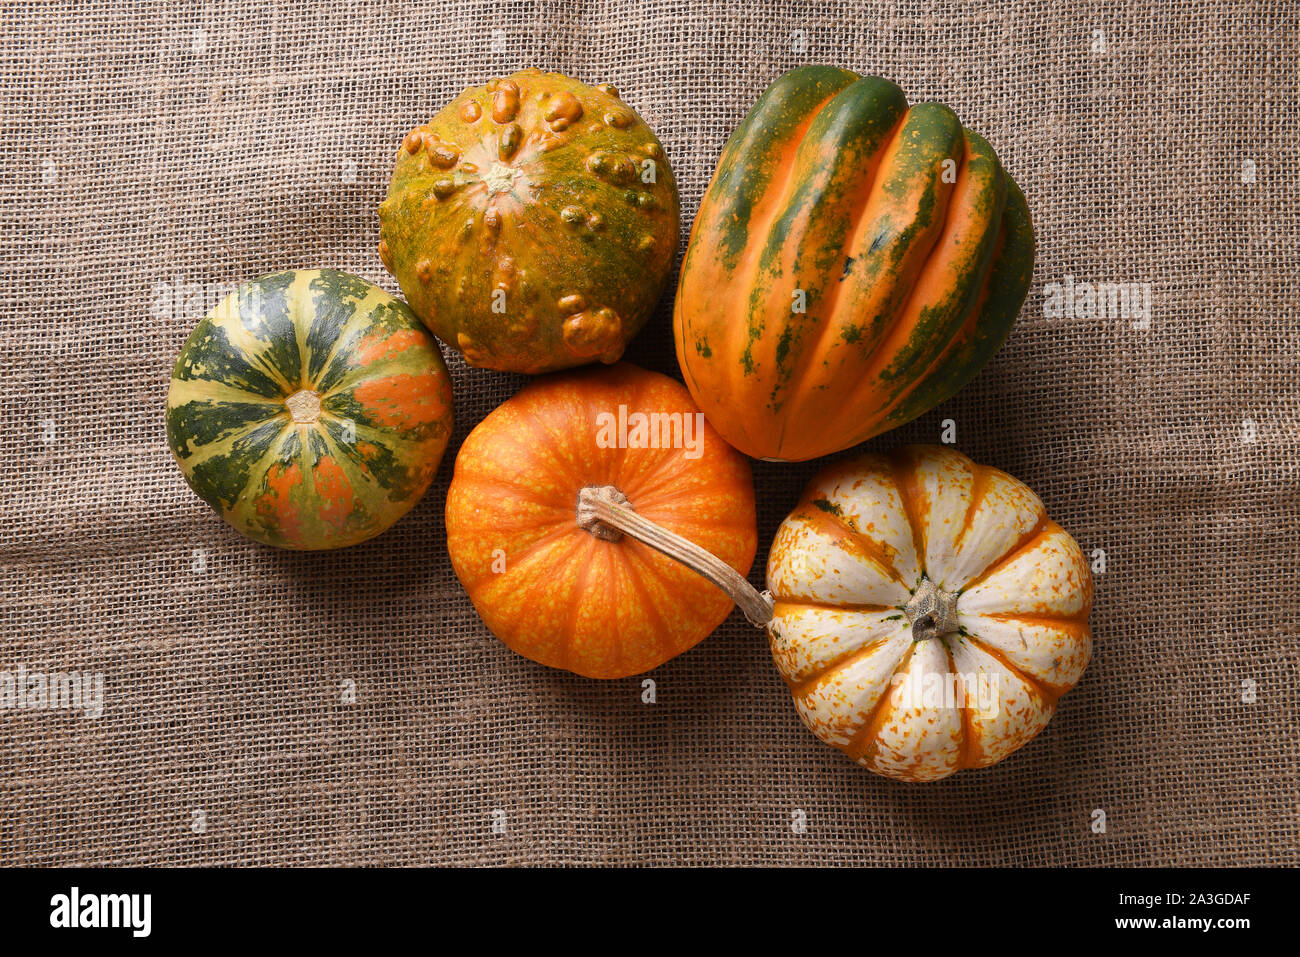 High angle shot of a group of autumn gourds, squash and pumpkins on burlap. Stock Photo